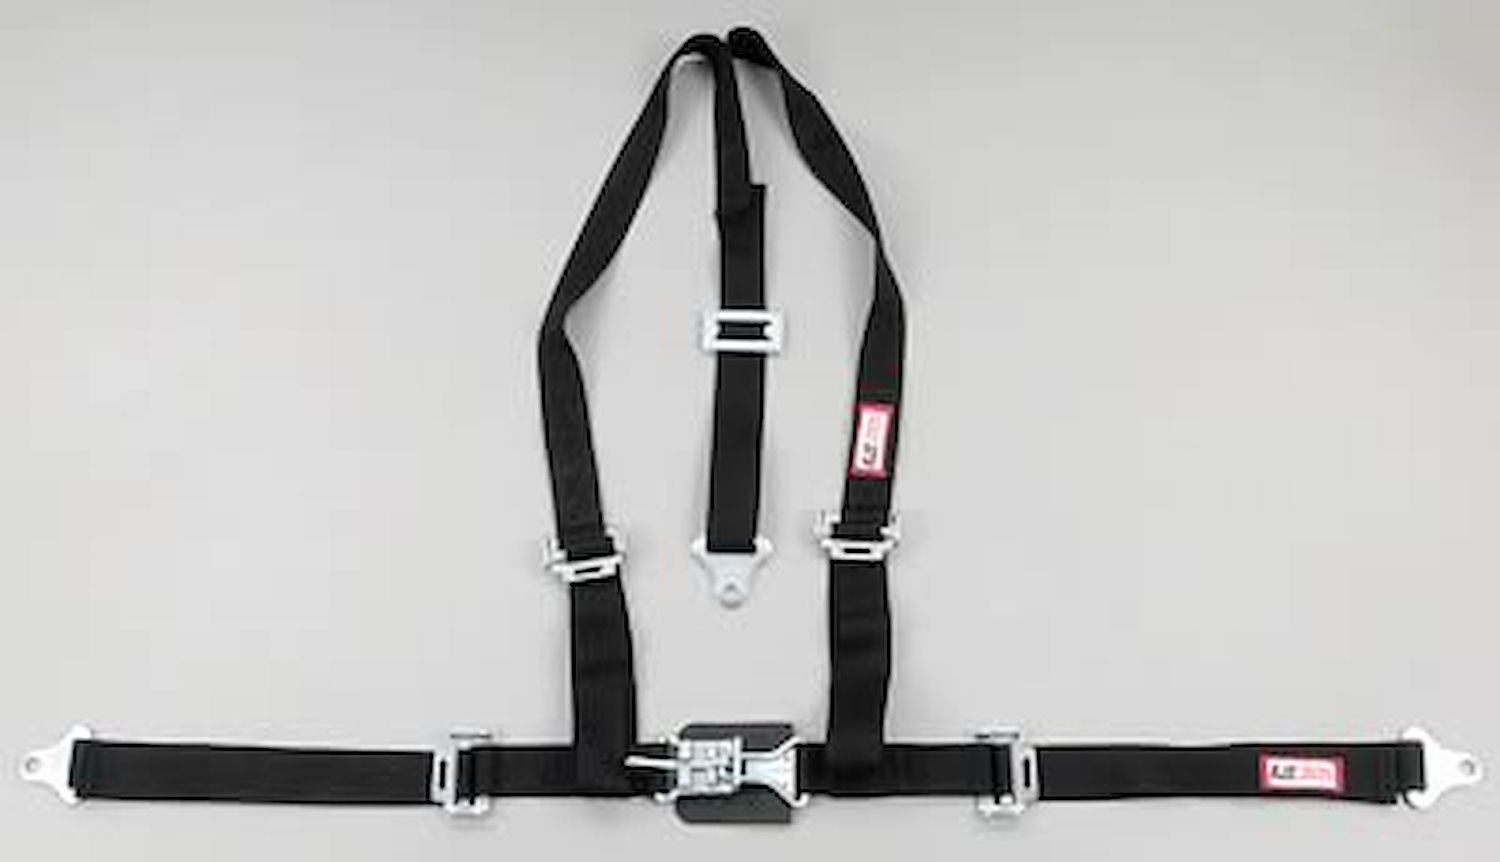 NON-SFI L&L HARNESS 3 PULL DOWN Lap Belt SNAP SEWN IN 2 S.H. Individual FLOOR Mount w/STERNUM STRAP WRAP/SNAP ORANGE